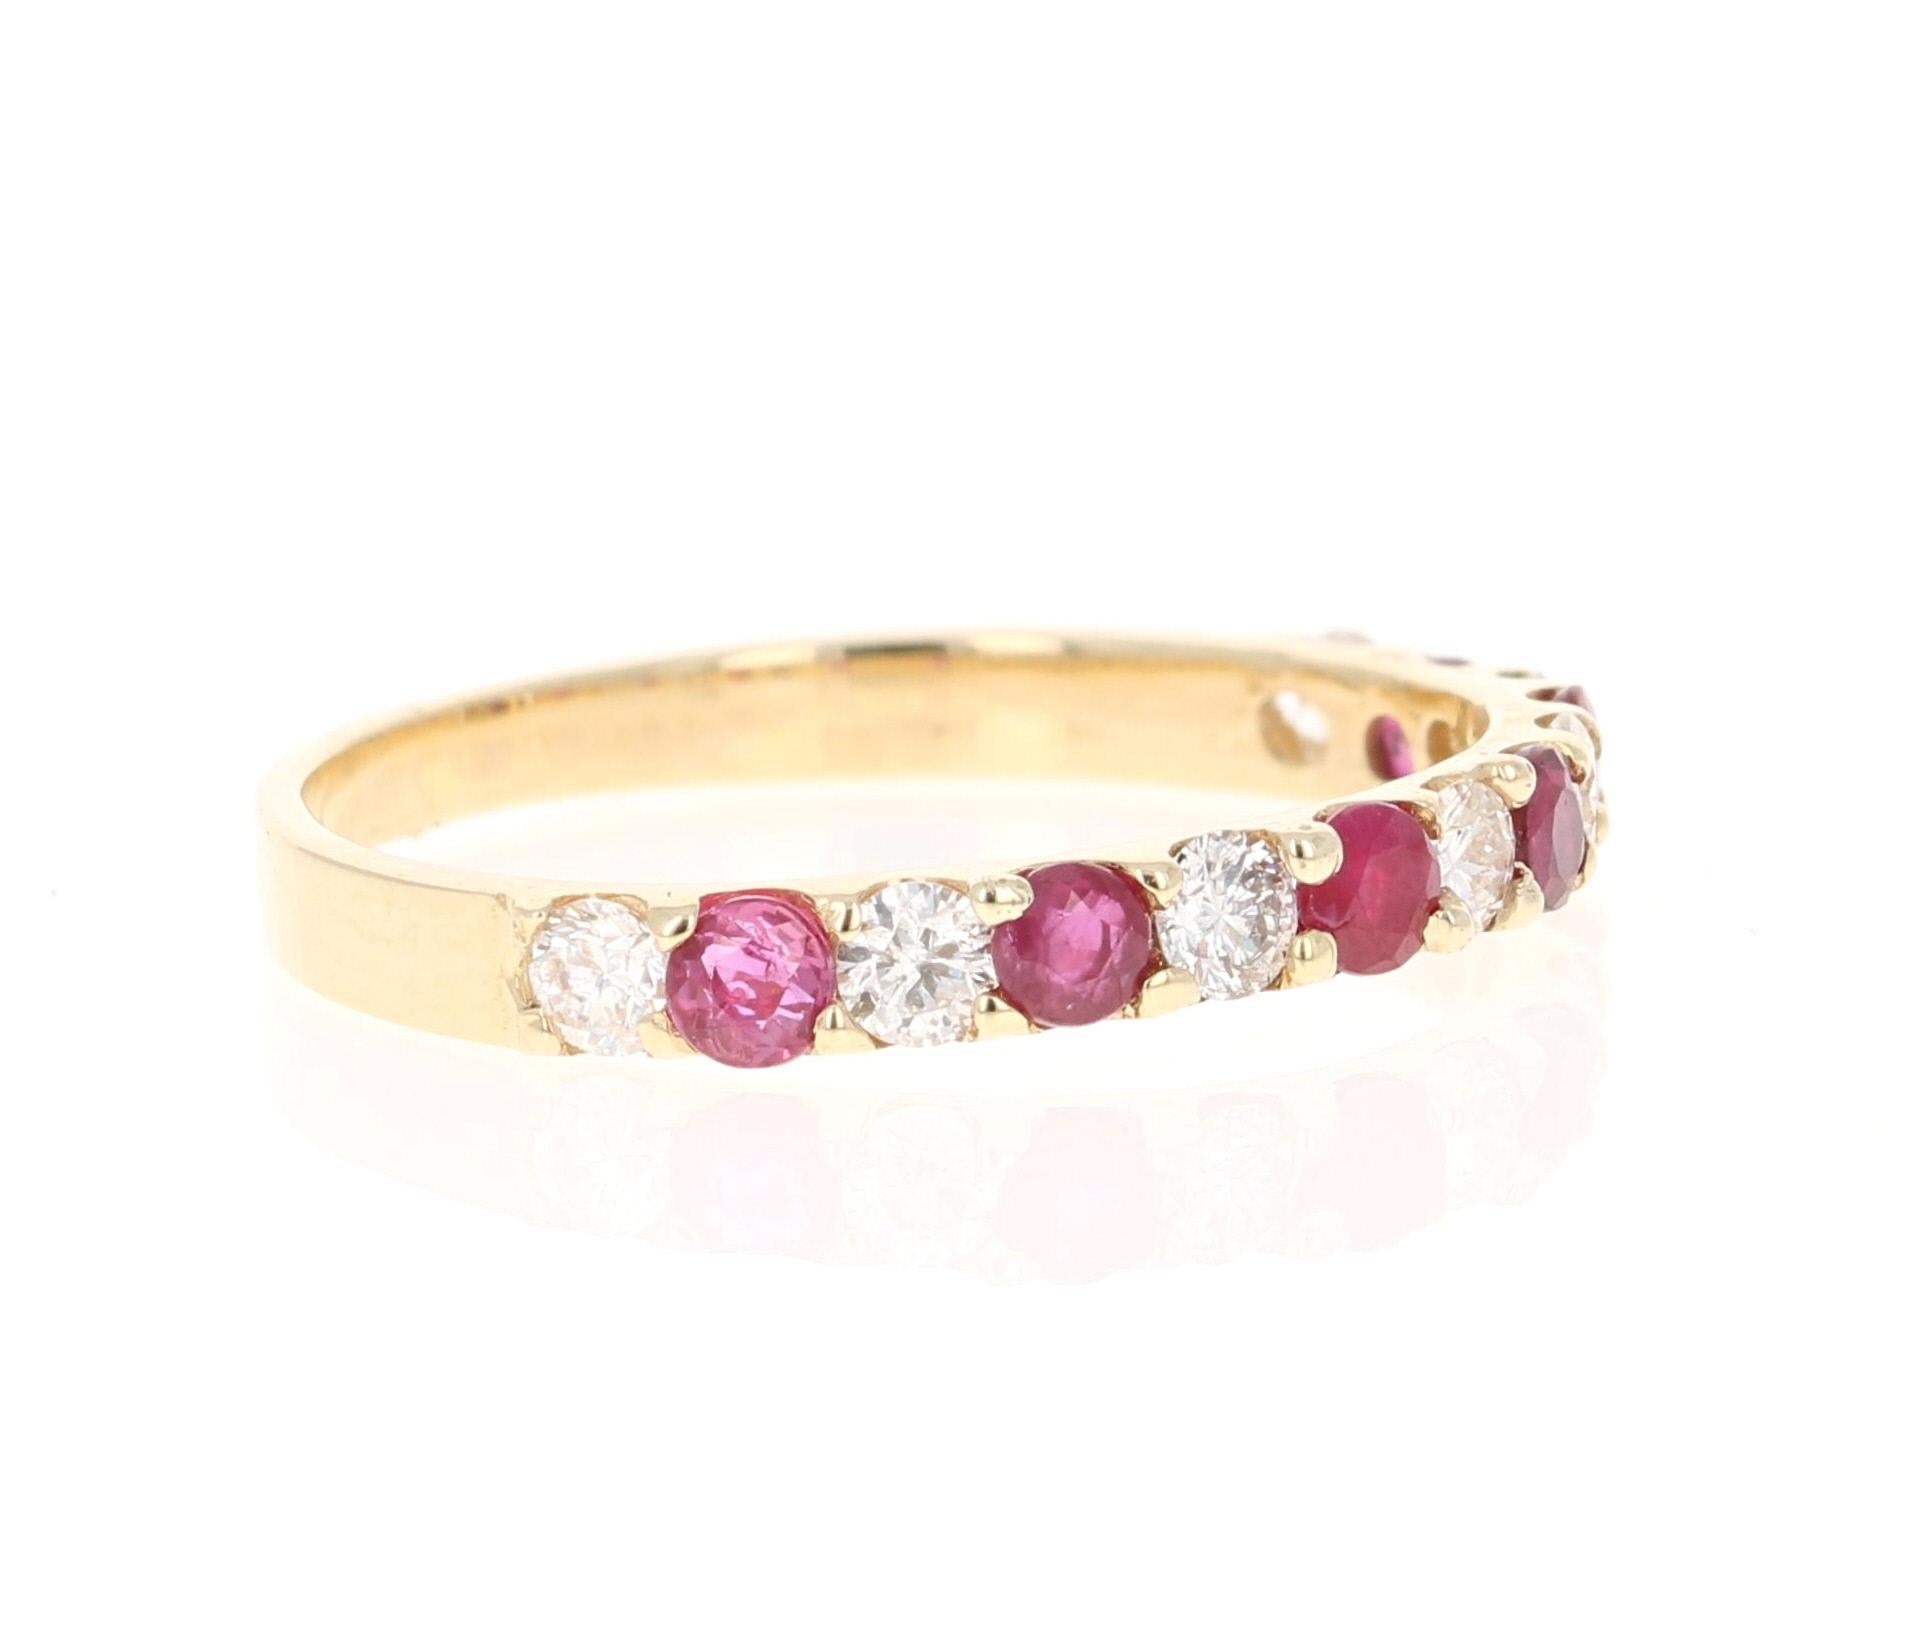 This is a classic band that is a must-have!
It has 6 Rubies that weigh 0.31 Carats and 7 Round Cut Diamonds that weigh 0.27 Carats. (Clarity: VS, Color: H) The Total Carat Weight of the Band is 0.58 Carats
It is made in 14K Yellow Gold and weighs